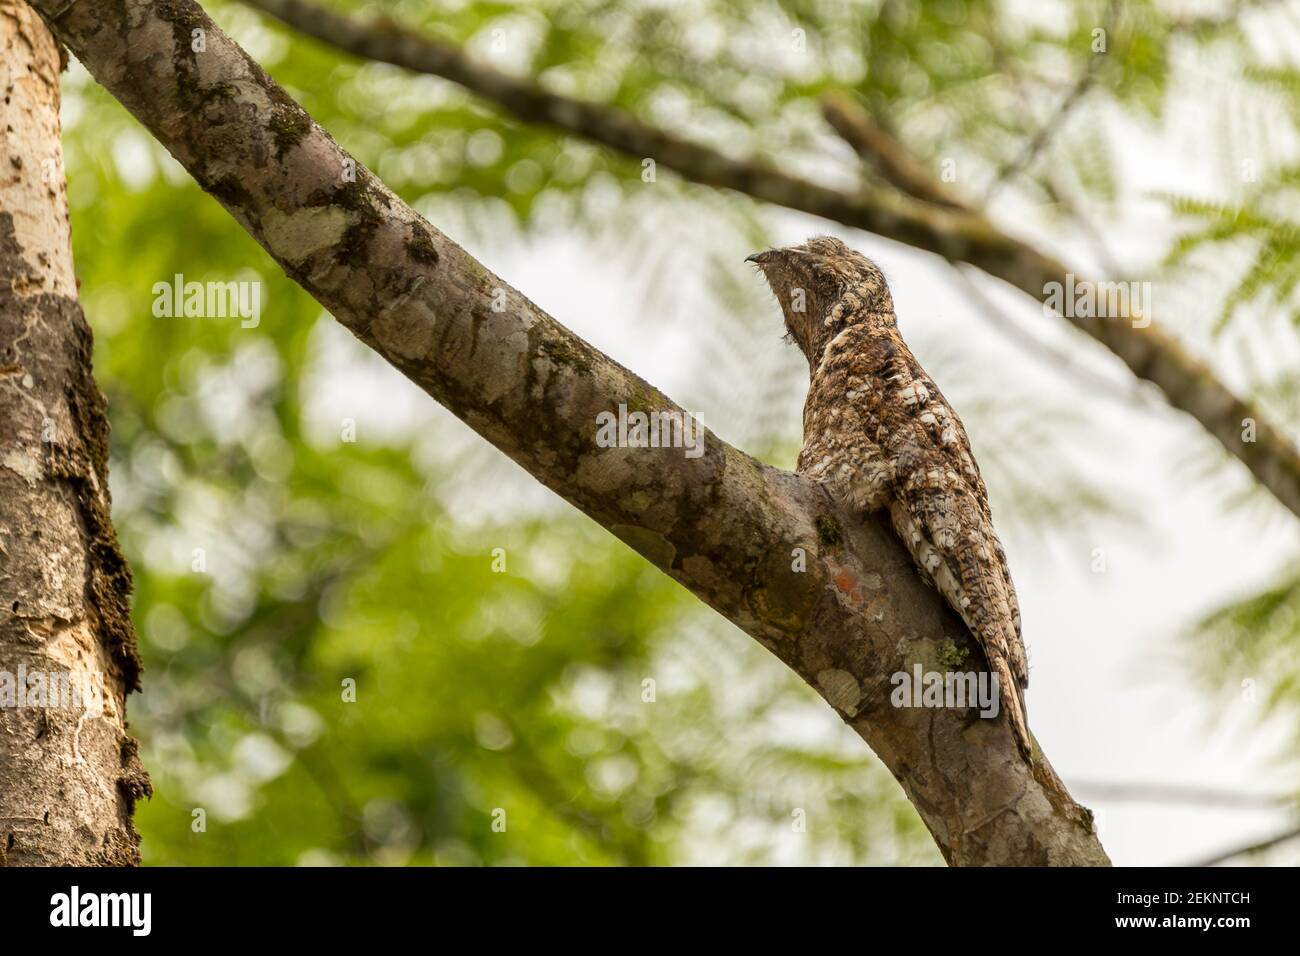 Potoo (Nyctibius Grandis) bird camouflaged on a tree branch with brown and white feathers totally still and stretched in the rainforest Stock Photo